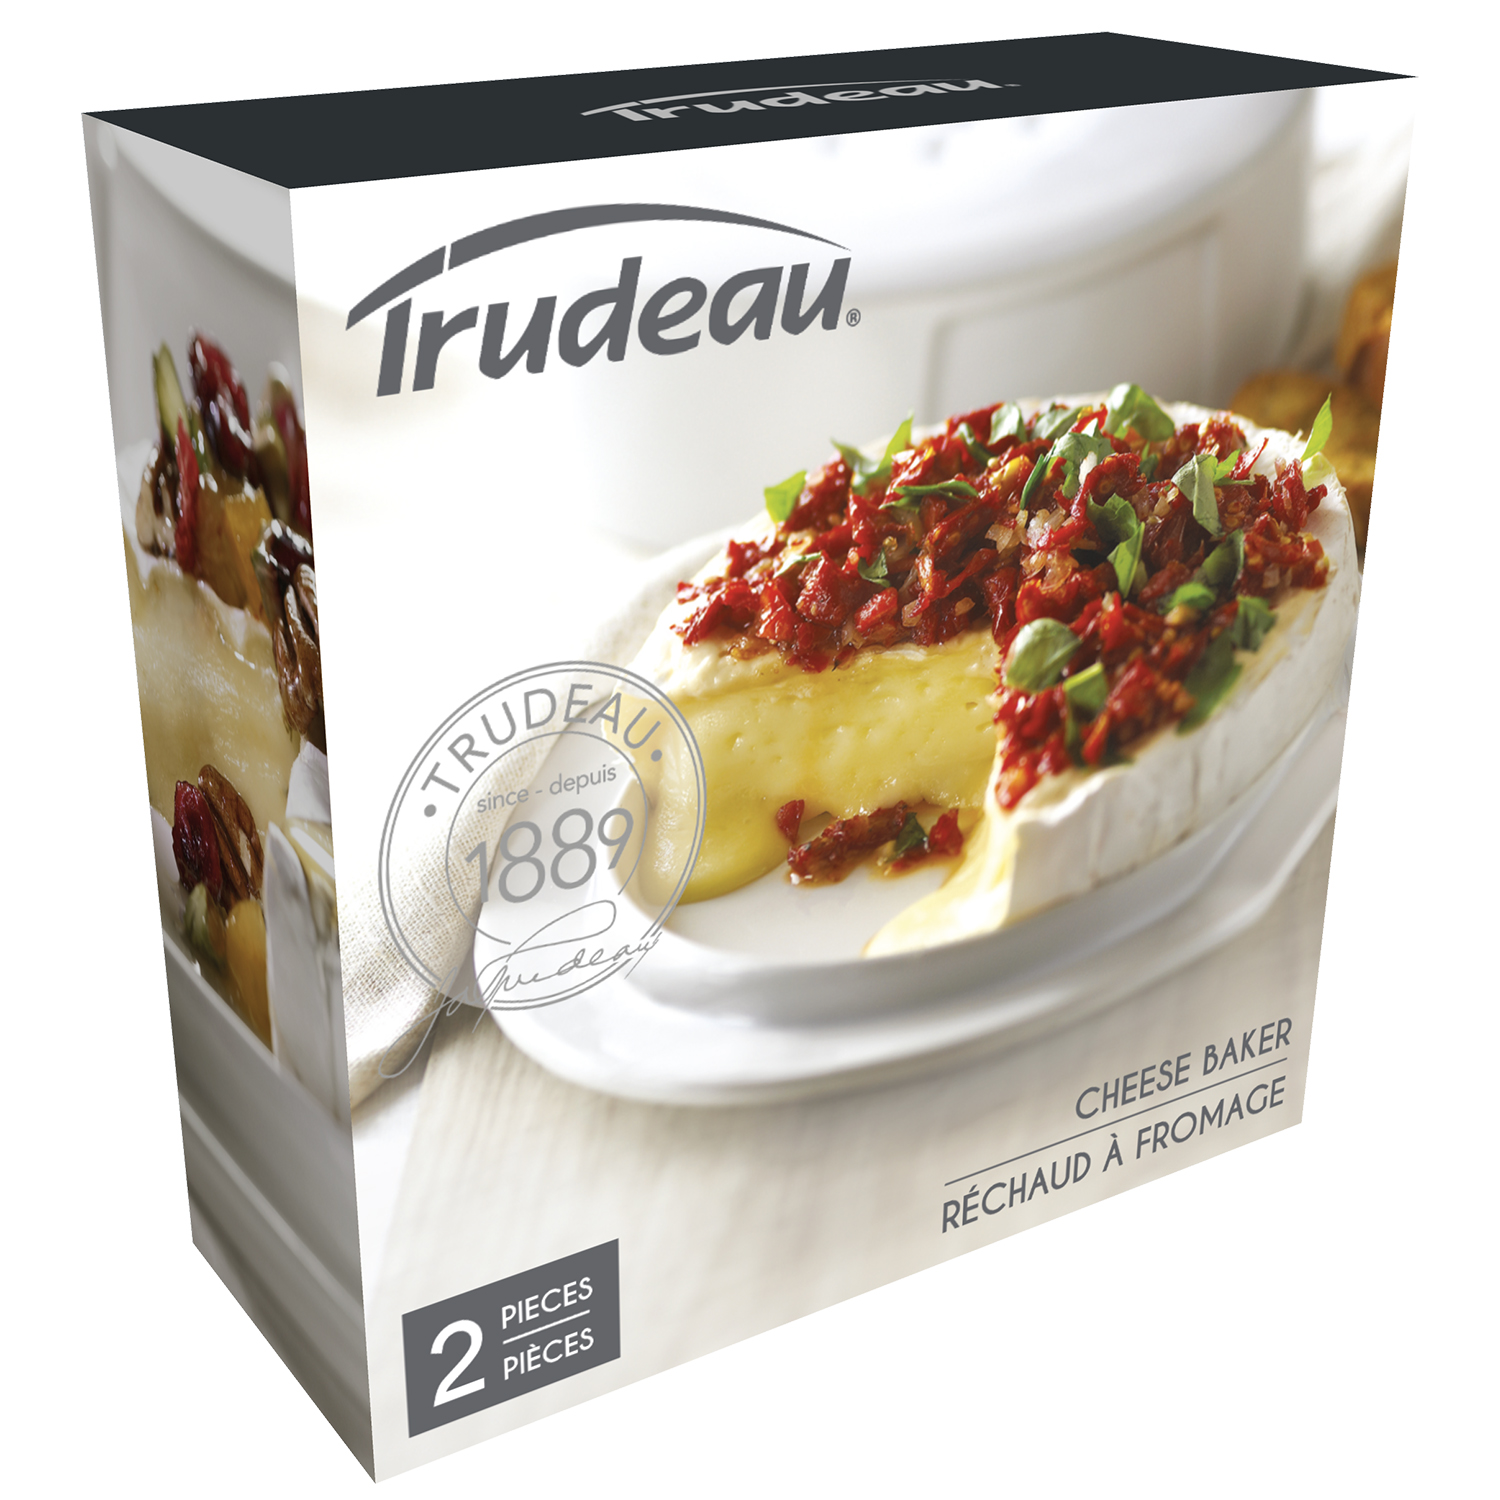 http://www.mayrand.ca/globalassets/mayrand/catalog-mayrand/articles-de-cuisine/02129-plat-pour-cuisson-de-fromage-brie-trudeau.jpg